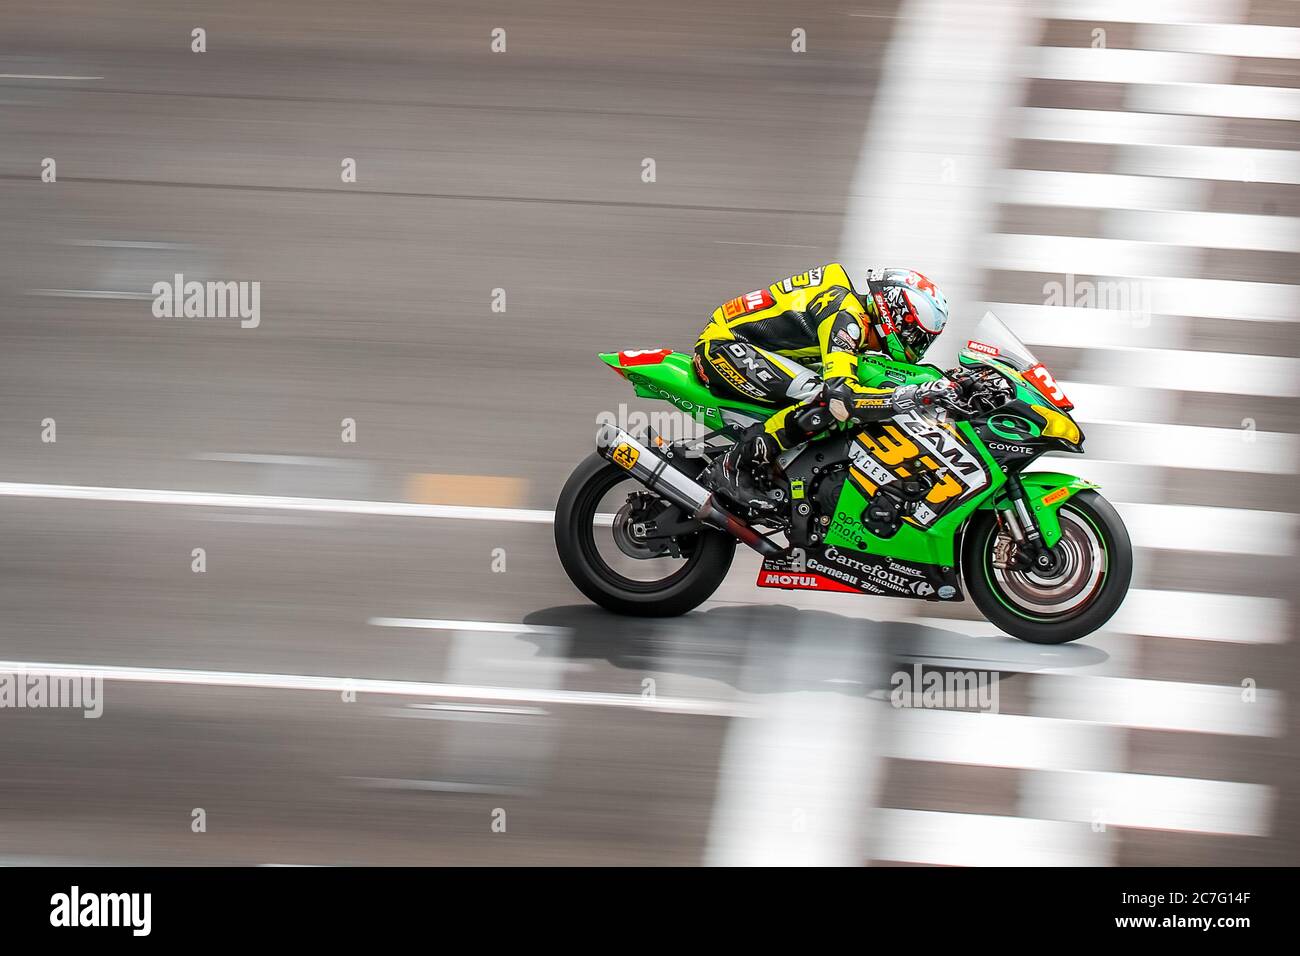 Zx 10r High Resolution Stock Photography and Images - Alamy